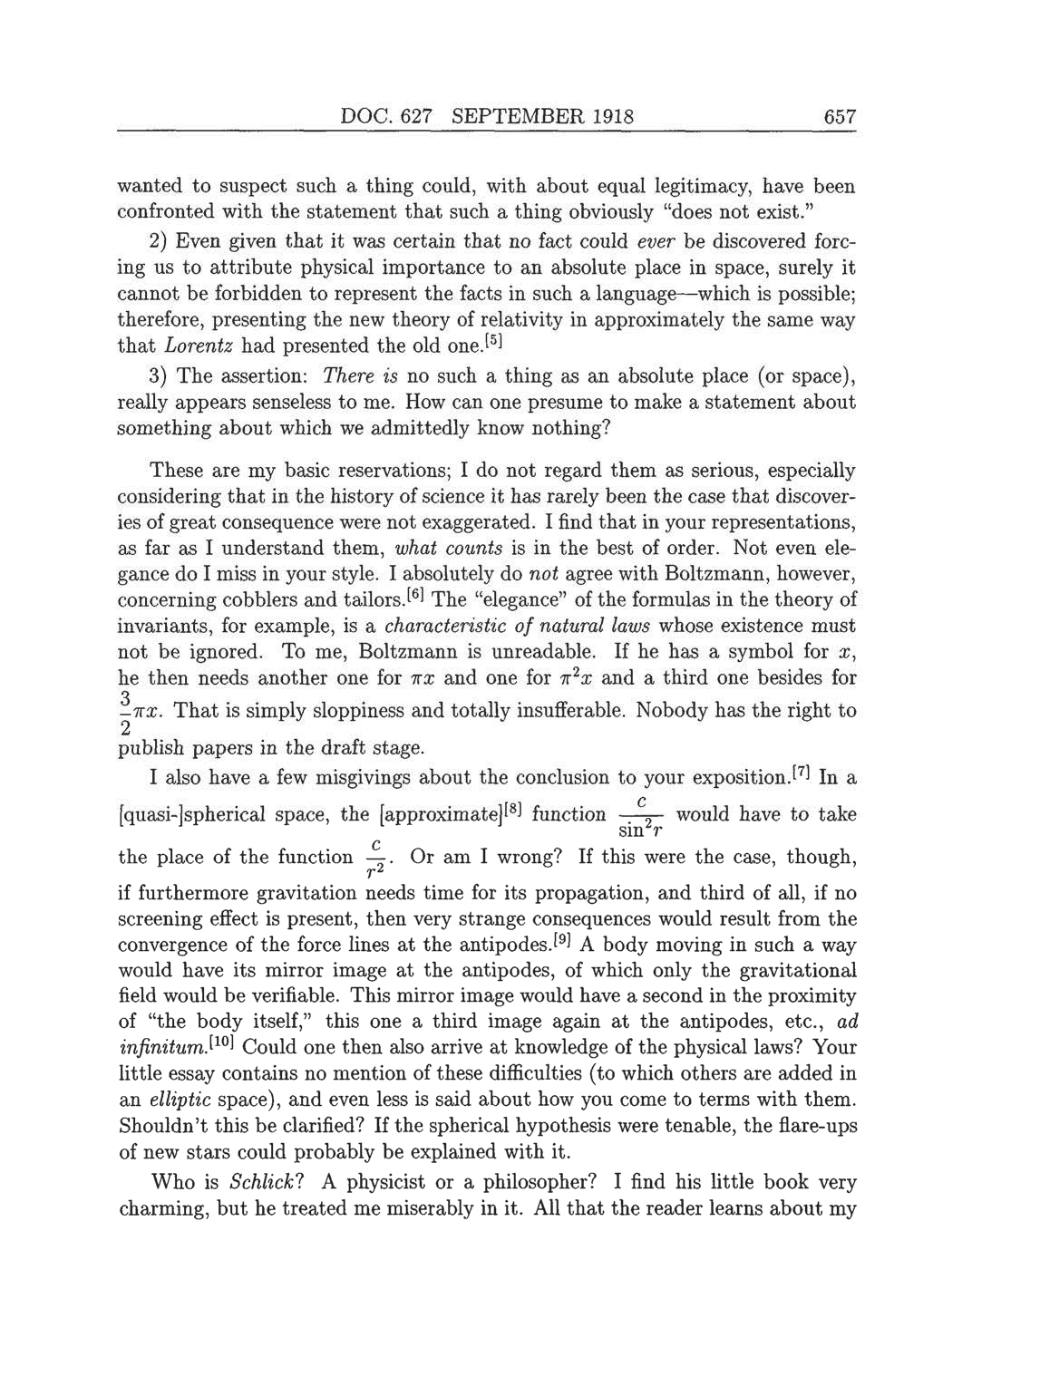 Volume 8: The Berlin Years: Correspondence, 1914-1918 (English translation supplement) page 657